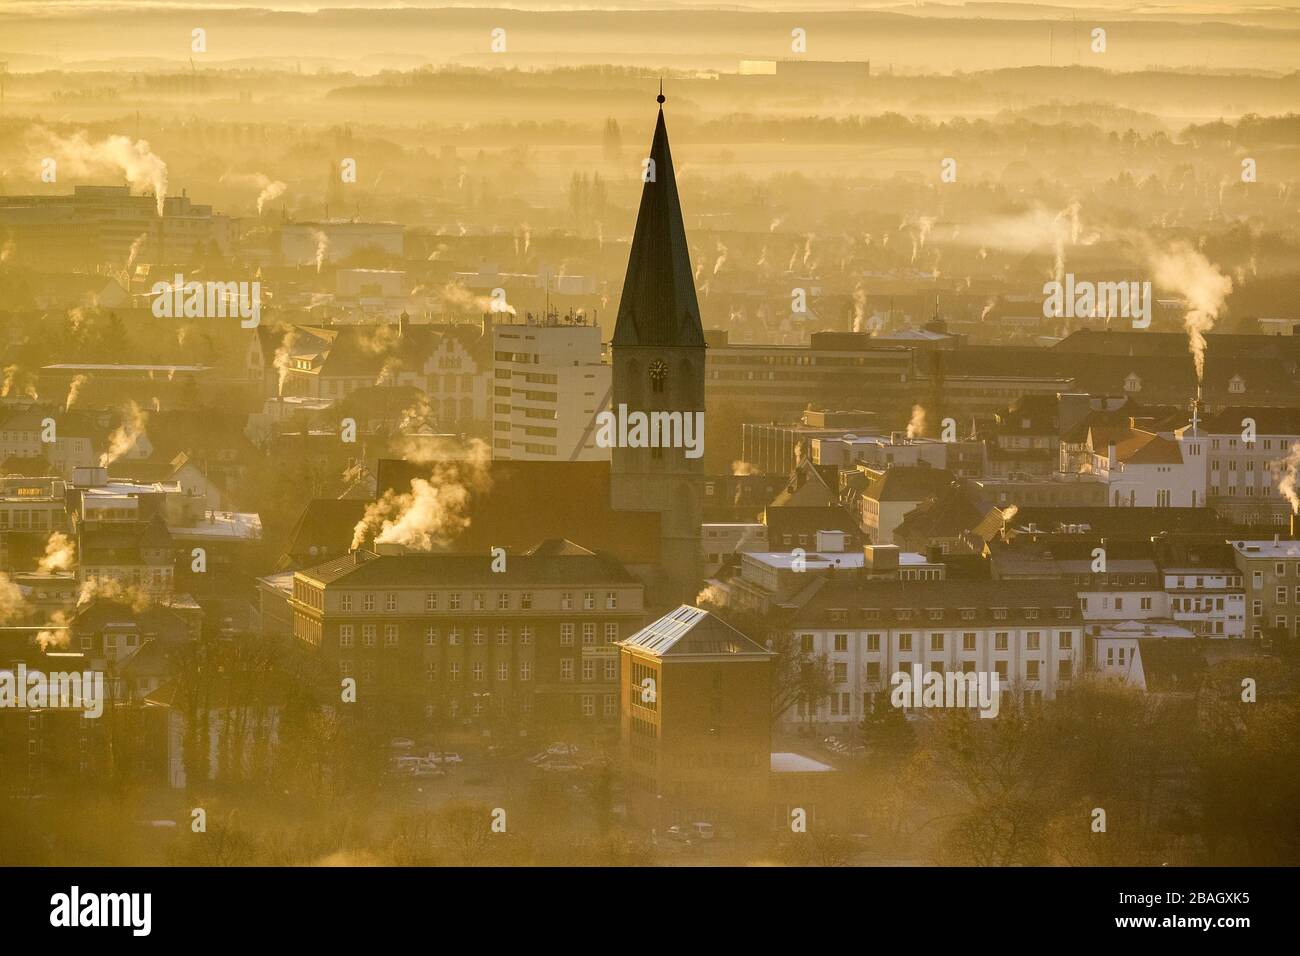 , Morning fog over St. Paul's Church in Hamm, 11.12.2013, aerial view, Germany, North Rhine-Westphalia, Ruhr Area, Hamm Stock Photo